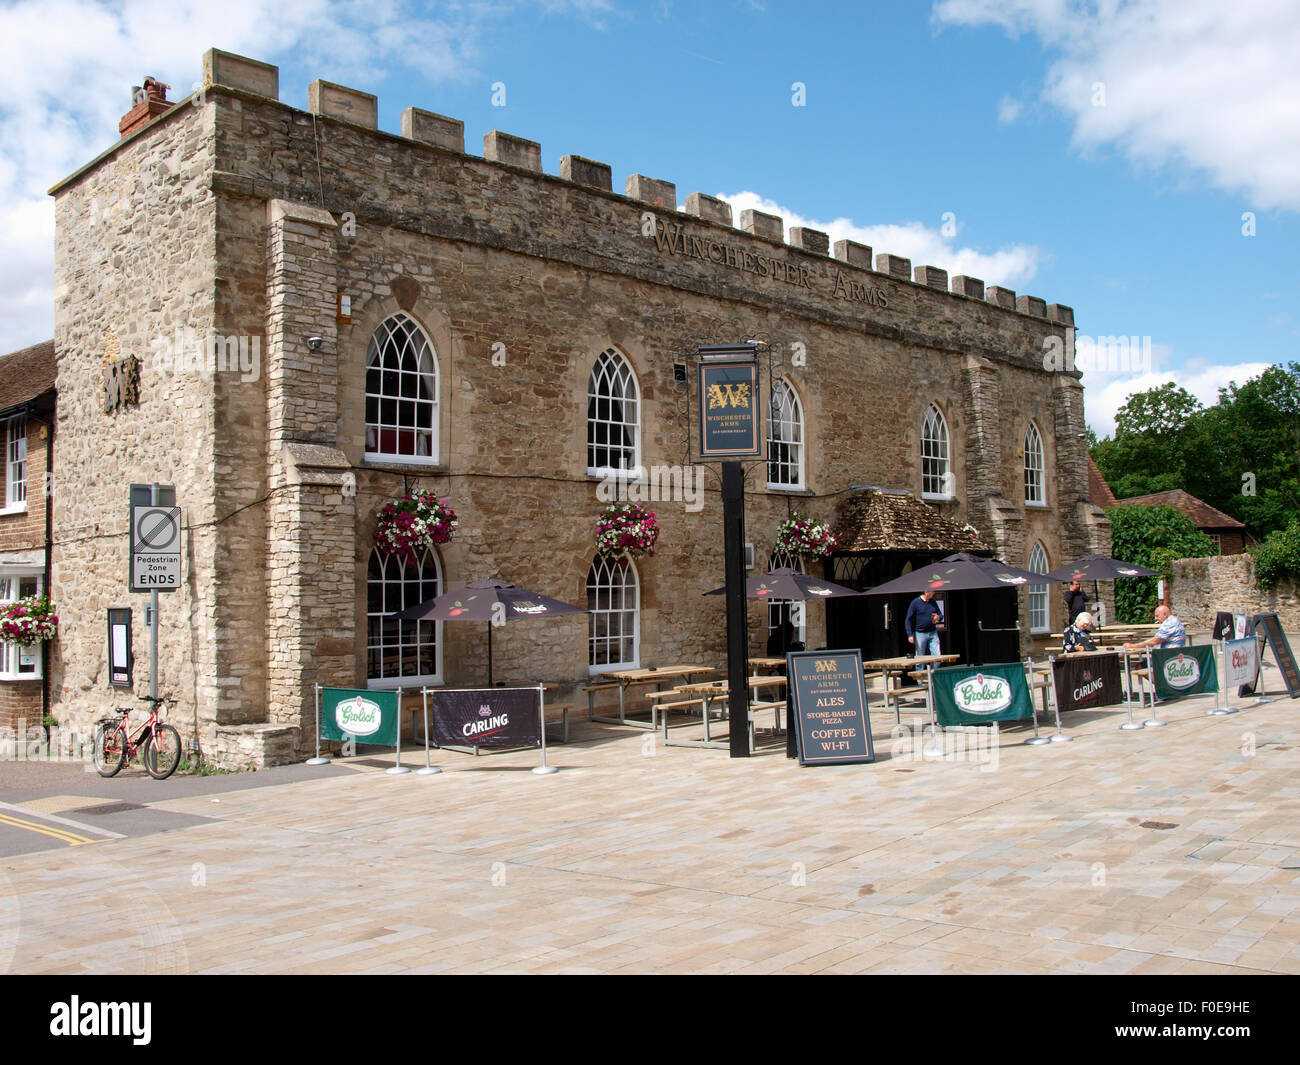 Winchester Arms pub, Castle Green, Taunton, Somerset, UK Stock Photo - Alamy